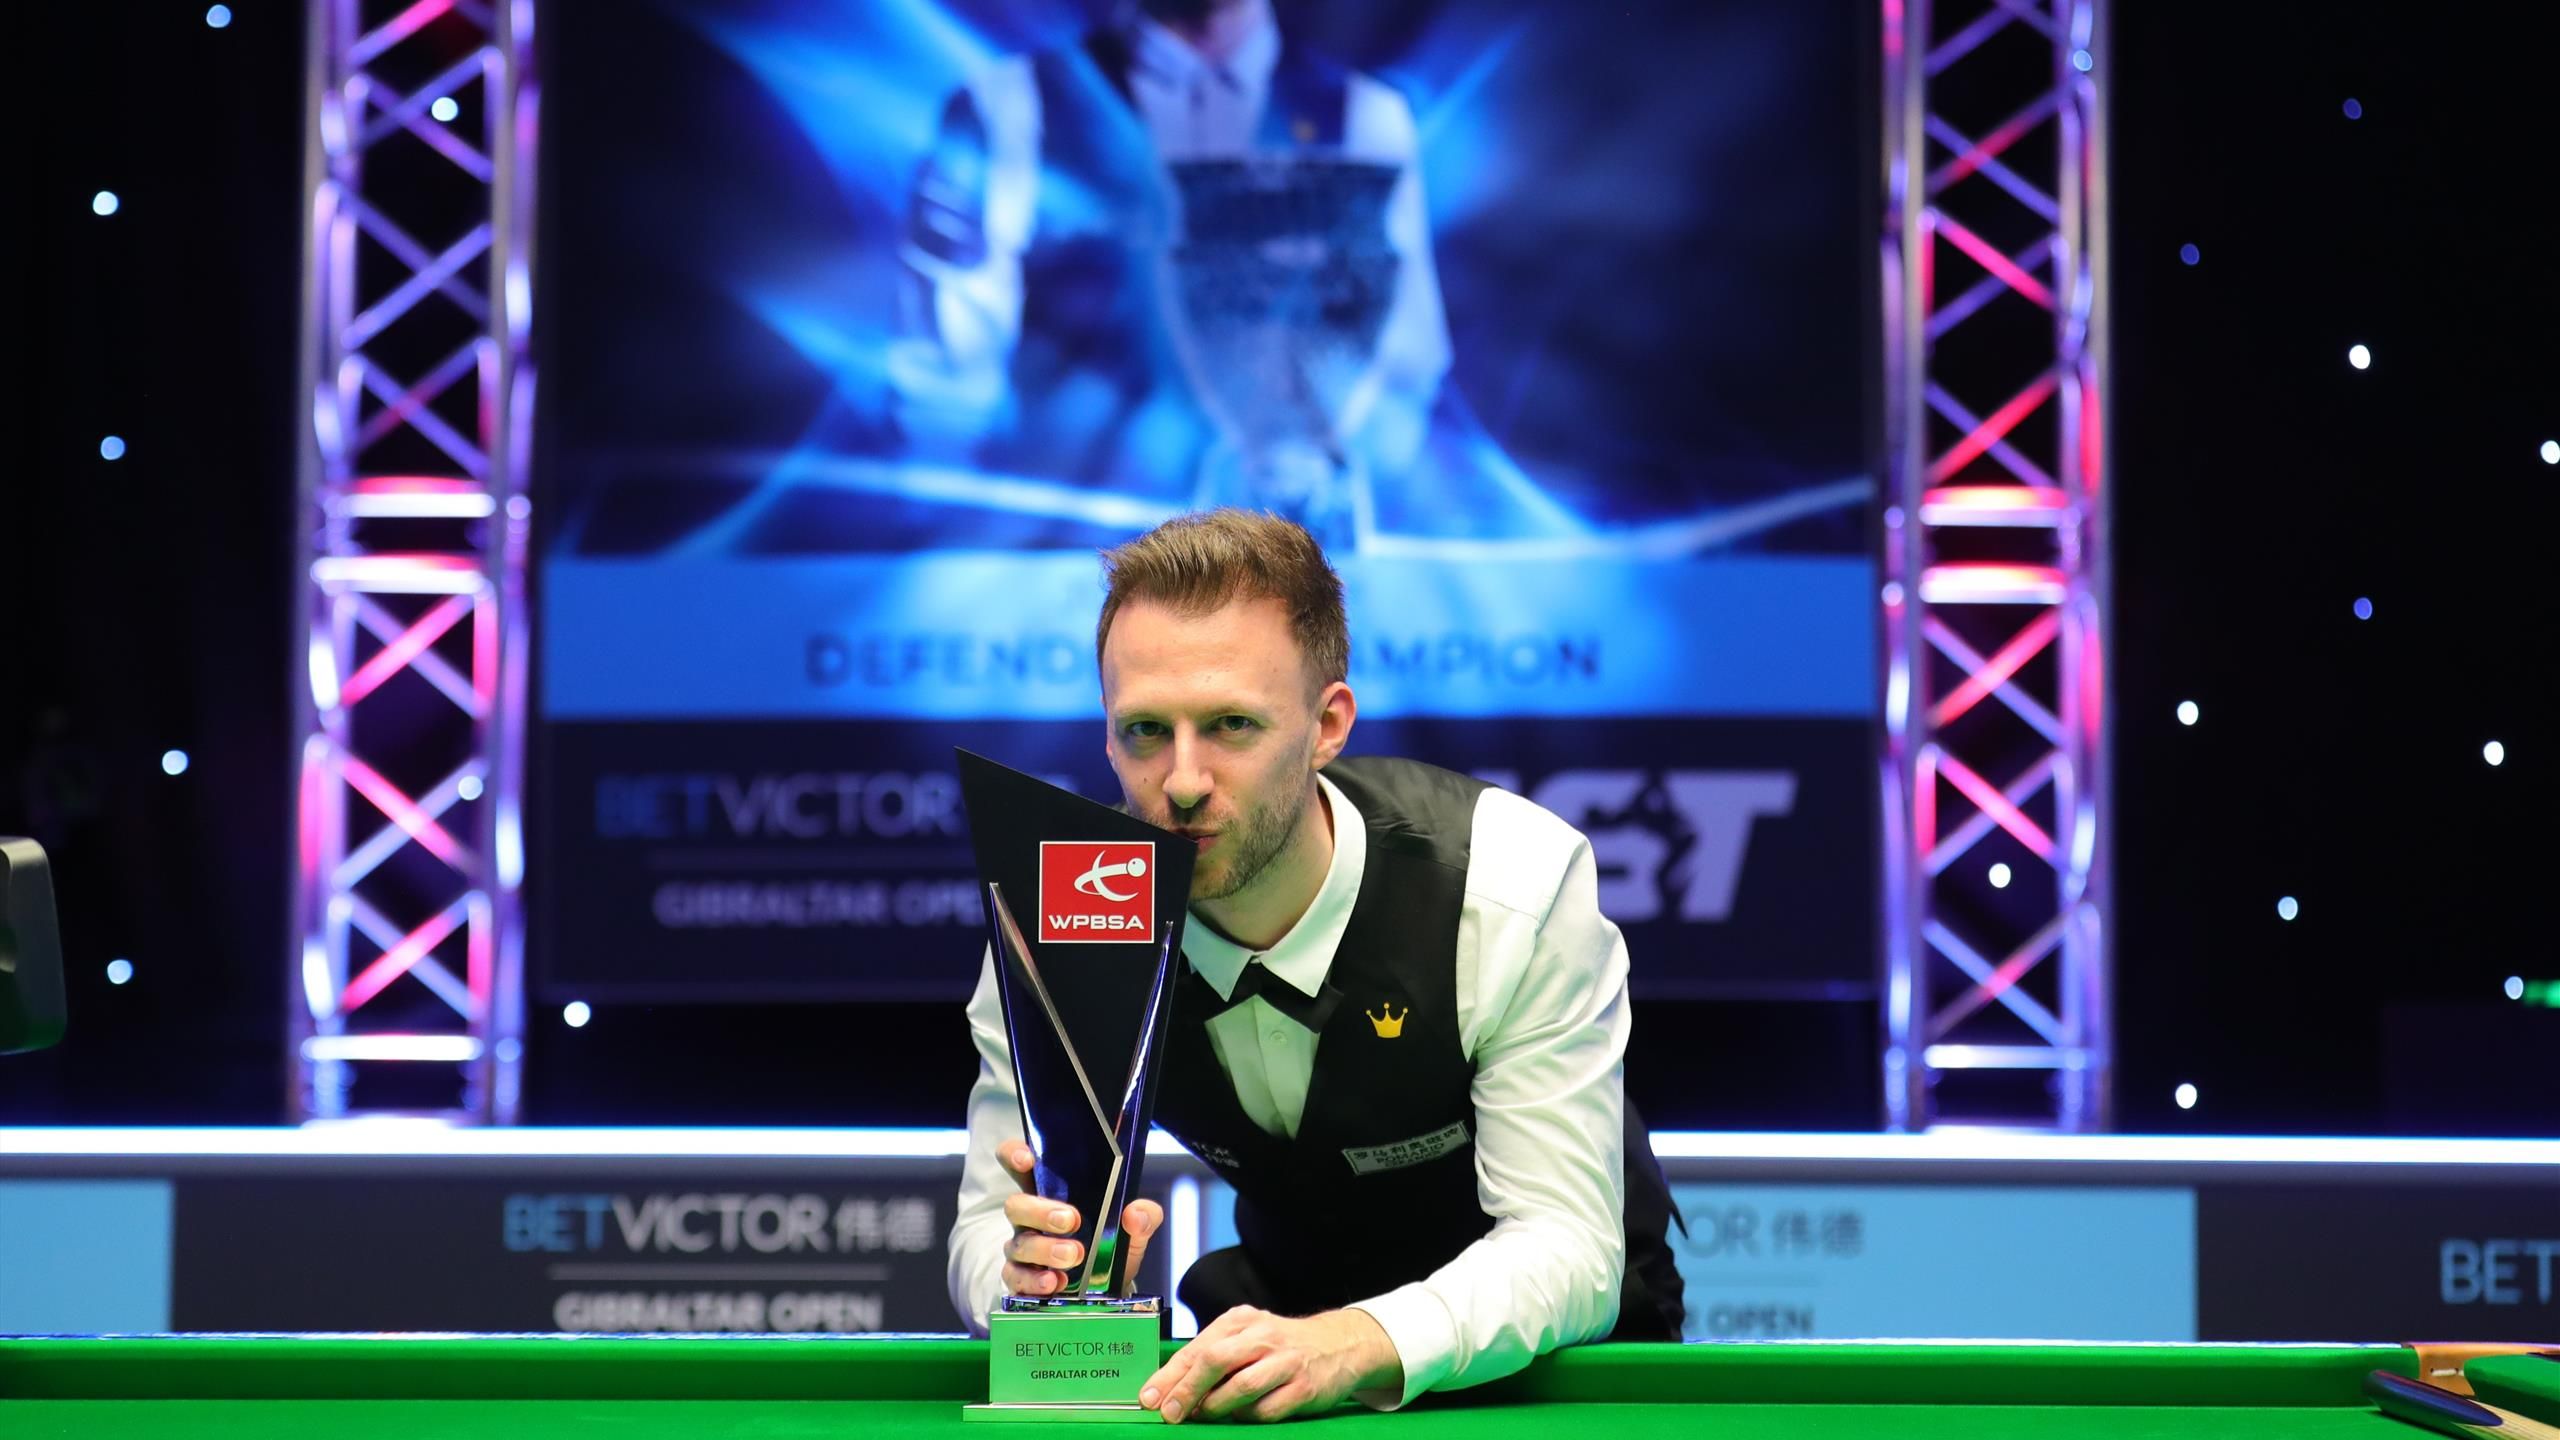 Gibraltar Open 2022 Latest results, scores, schedule and order of play as Ronnie OSullivan and Judd Trump target title